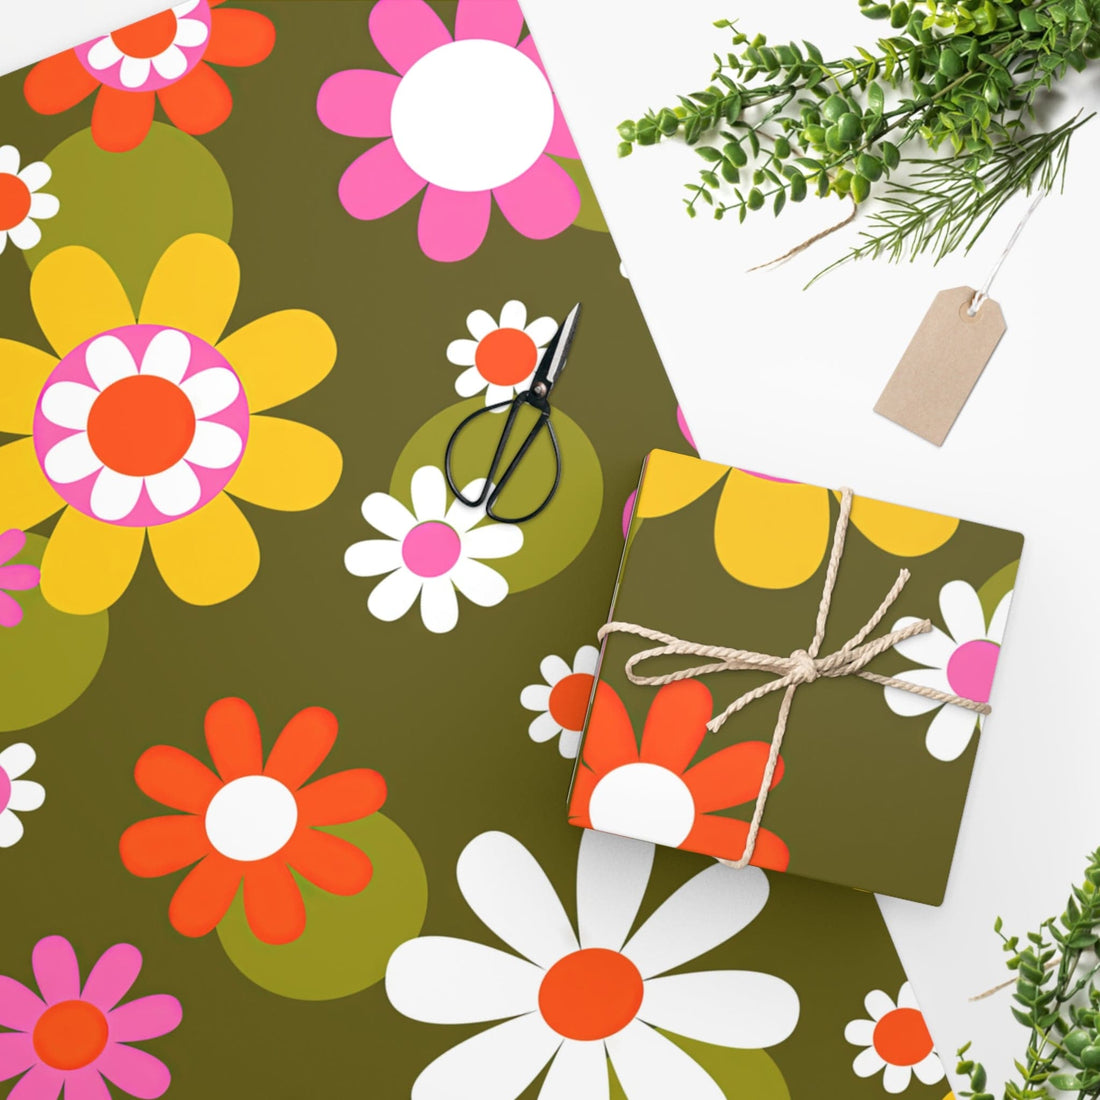 Printify Groovy Hippie Daisy Flower Power Wrapping Paper, Mid Century Modern Retro Gift Wrap Home Decor 24&quot; × 60&quot; 11859082243321882187